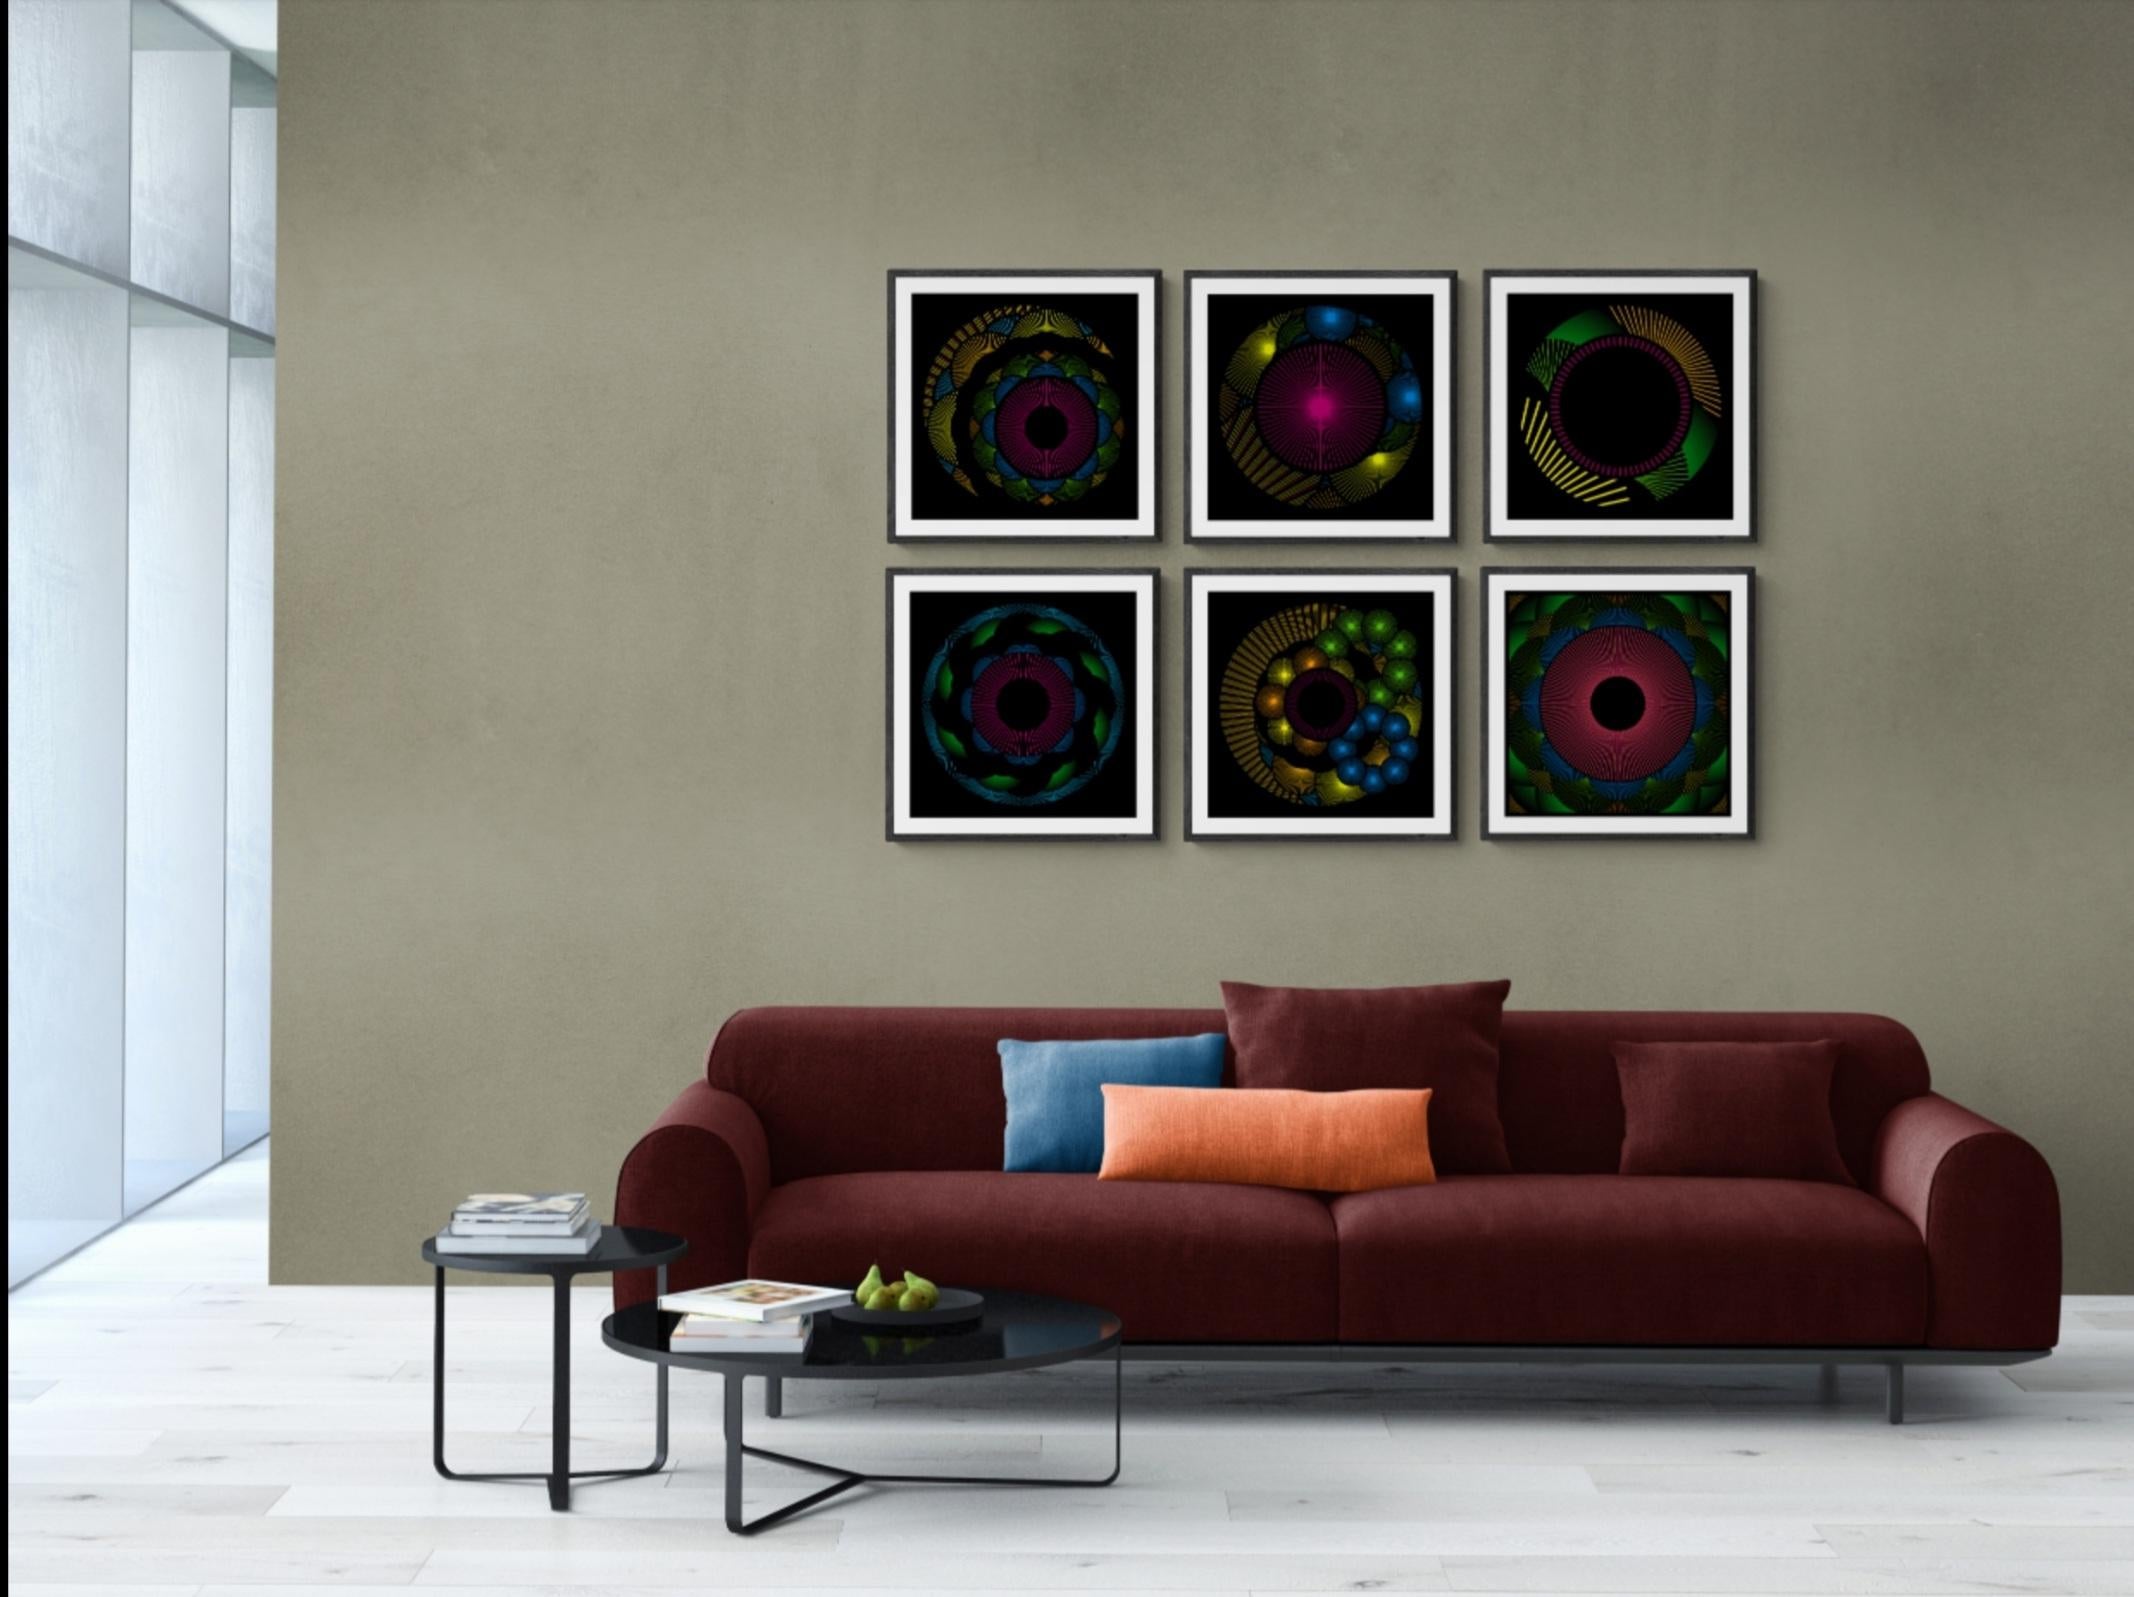 Nebulosa 29 - Abstract Geometric Print by Julio Campos